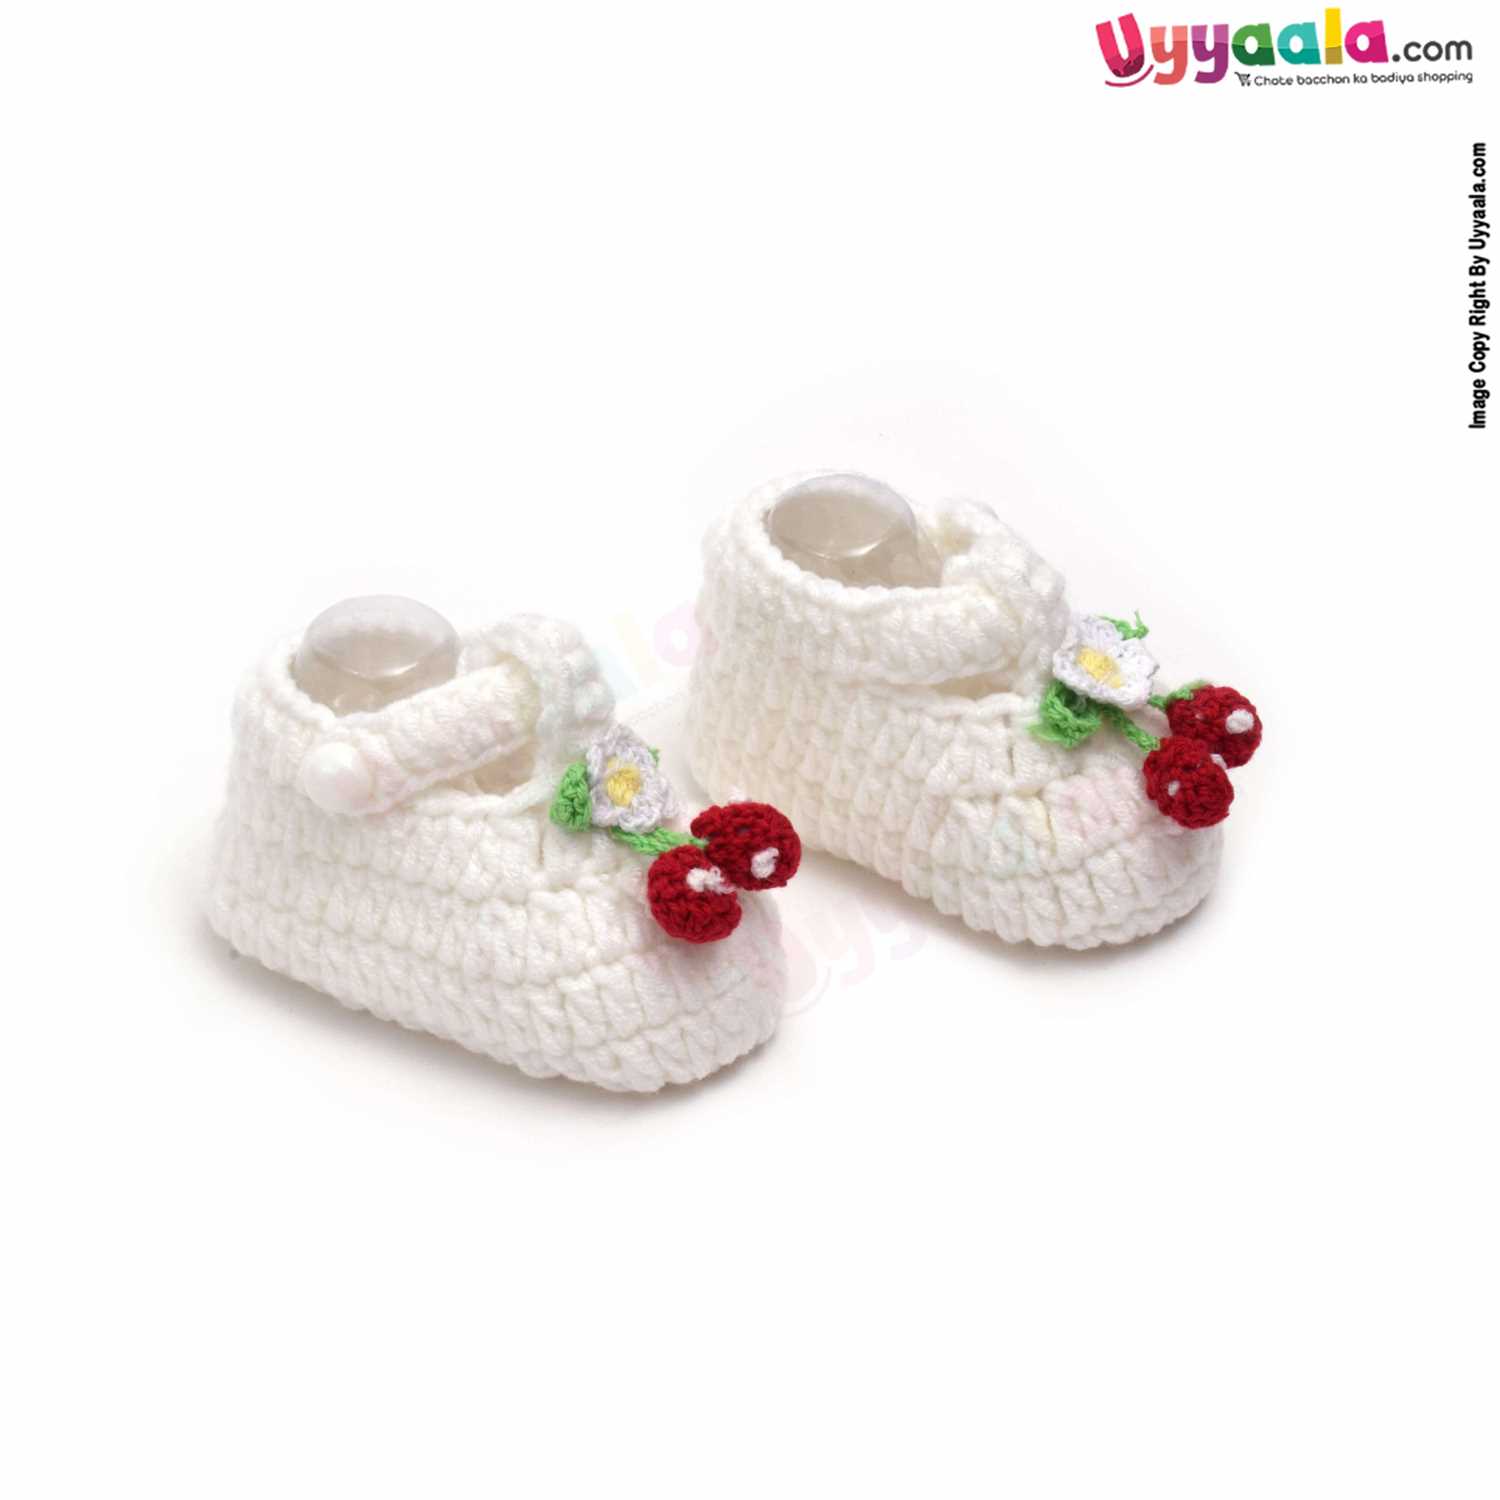 Woolen Hand Knitted Socks for New Born 0-6m Age - White